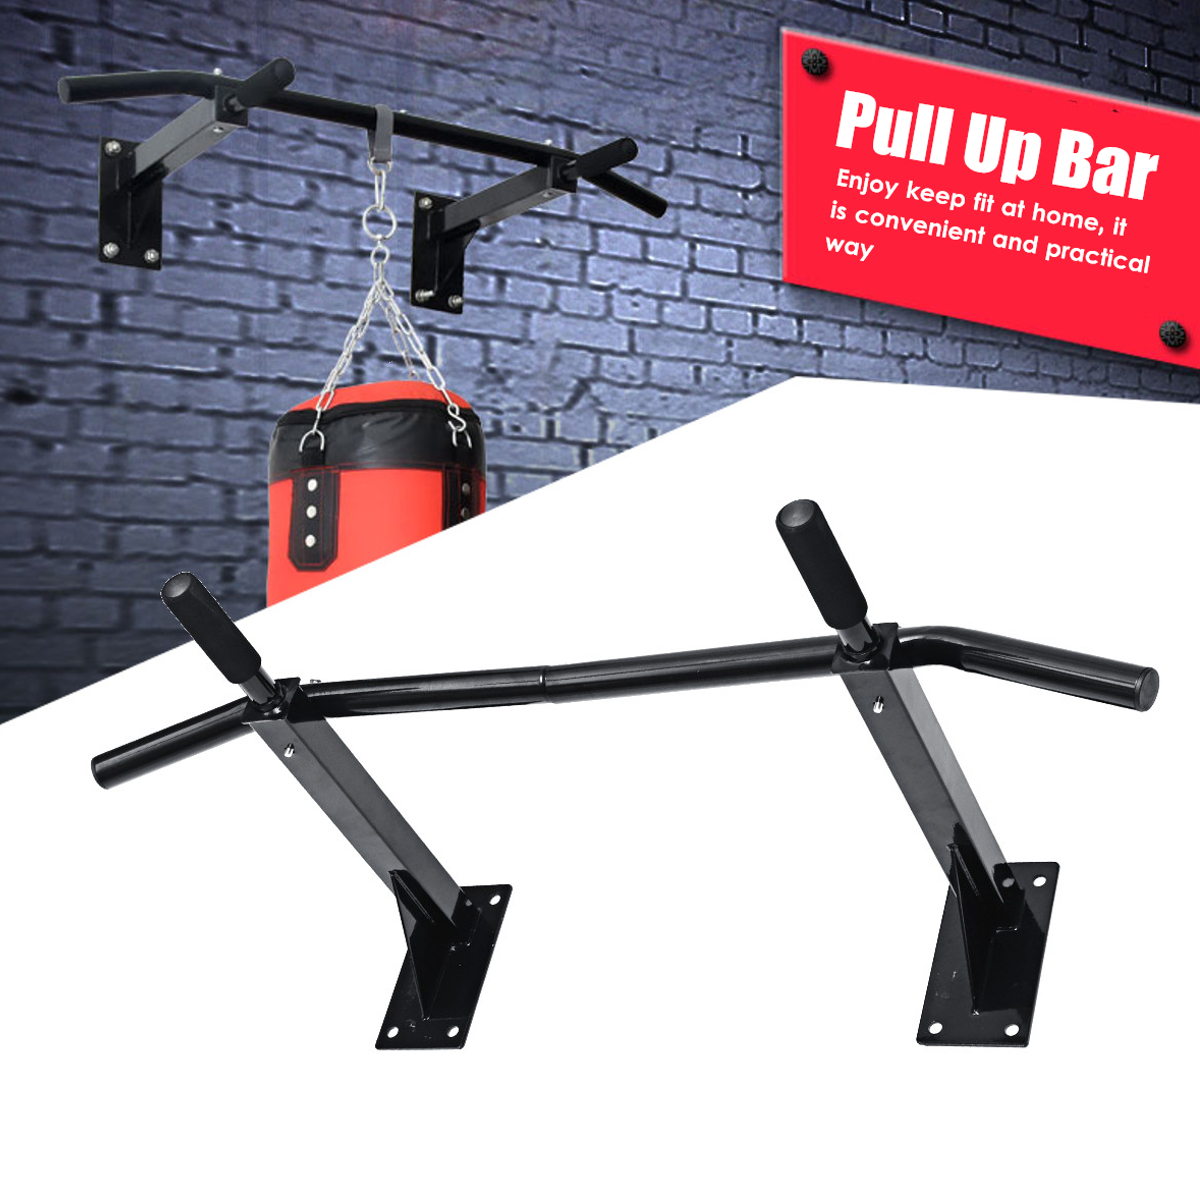 Heavy-Duty-Chinup-Pull-Up-Bar-Wall-Mounted-Exercise-Tools-Workout-Fitness-Gym-Home-1573804